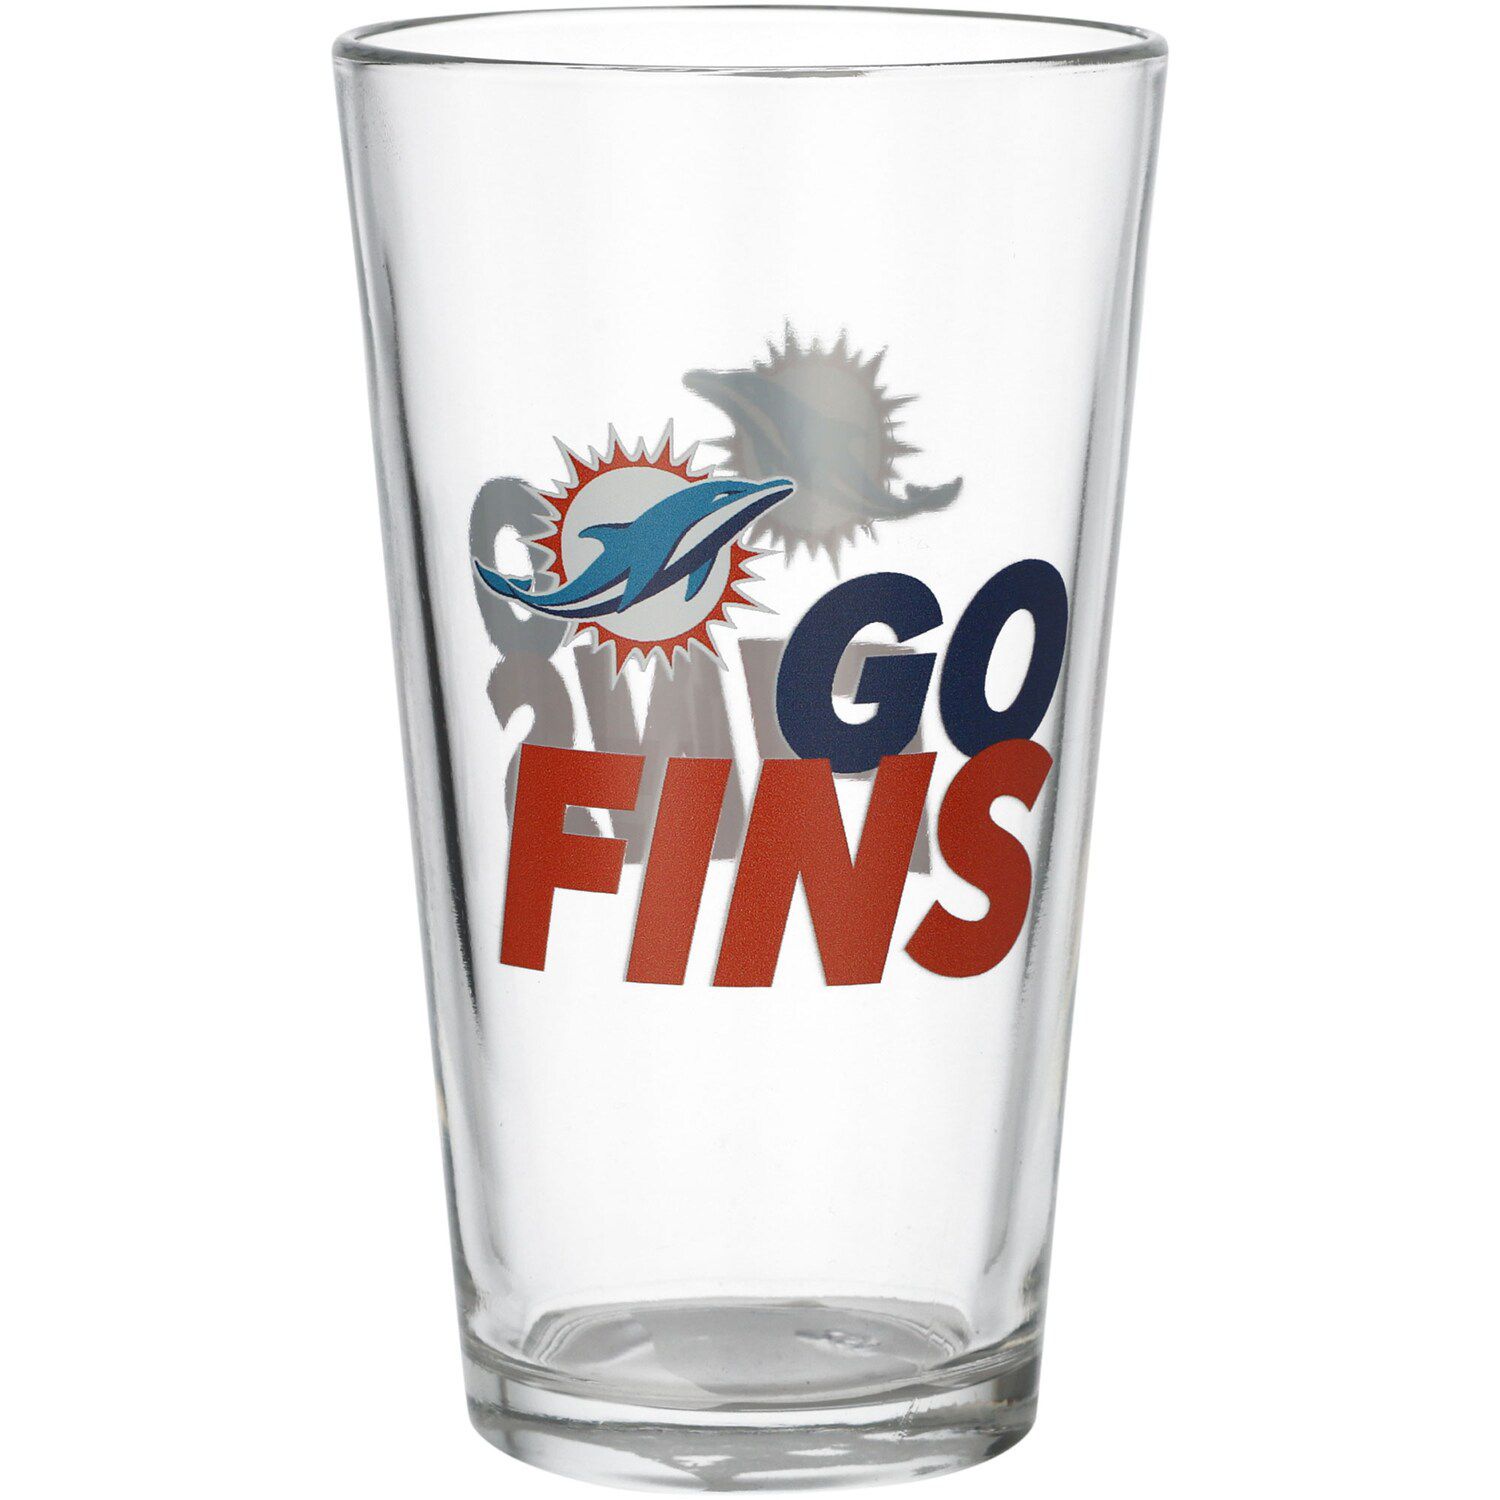 Image for Unbranded Miami Dolphins 16oz. Team Slogan Pint Glass at Kohl's.